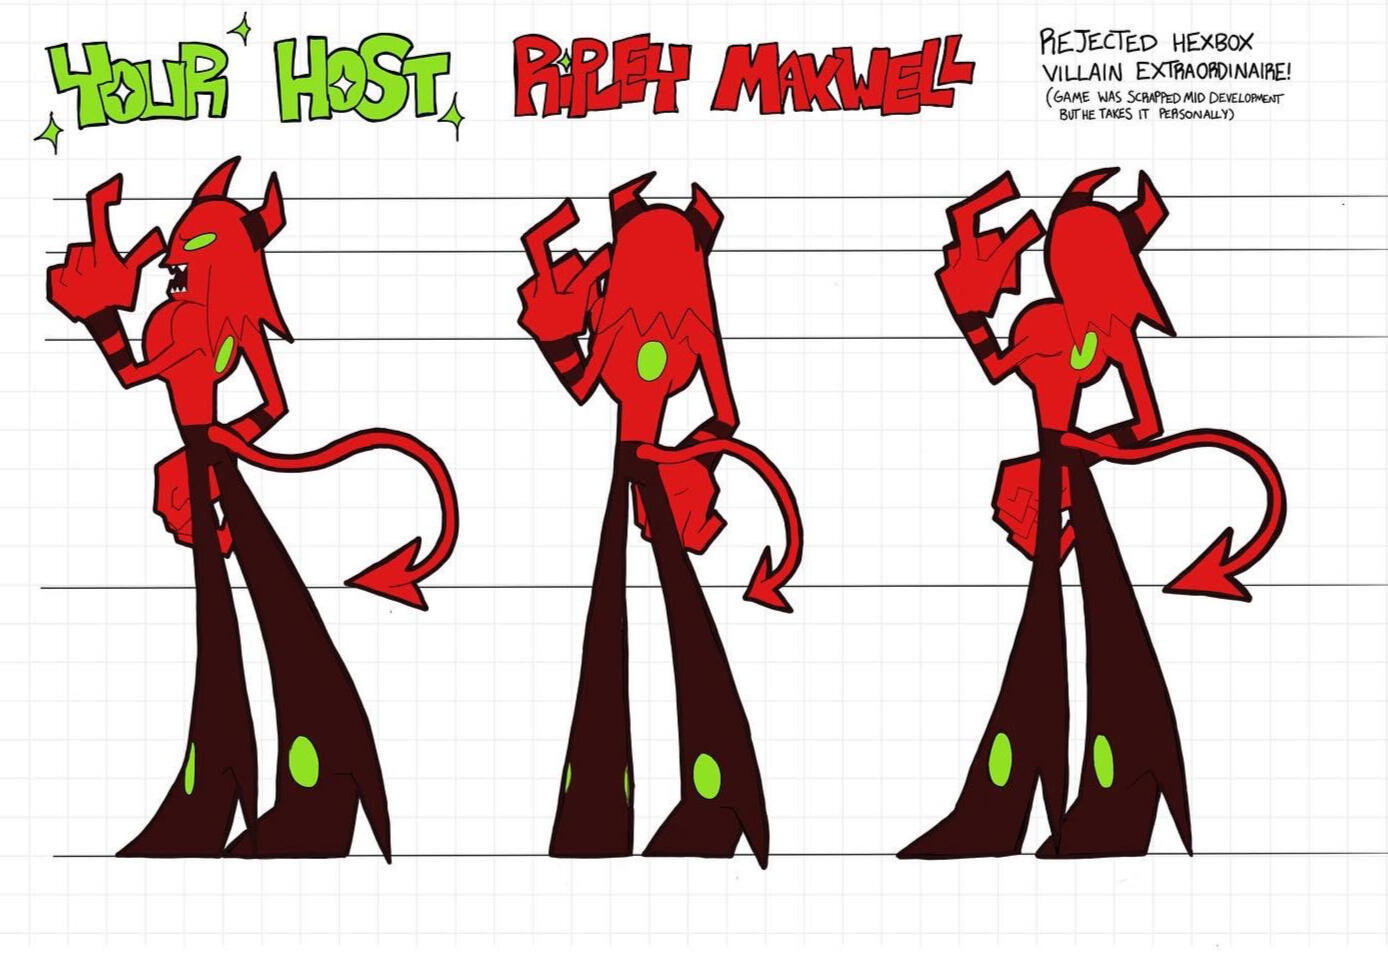 This was my first time doing a turnaround for an asymmetrical design! This was both very fun and very challenging. Ripley takes a lot of inspiration from characters like HIM from powerpuff girls, and beezlebot from futurama. Done in 2021. [Back]